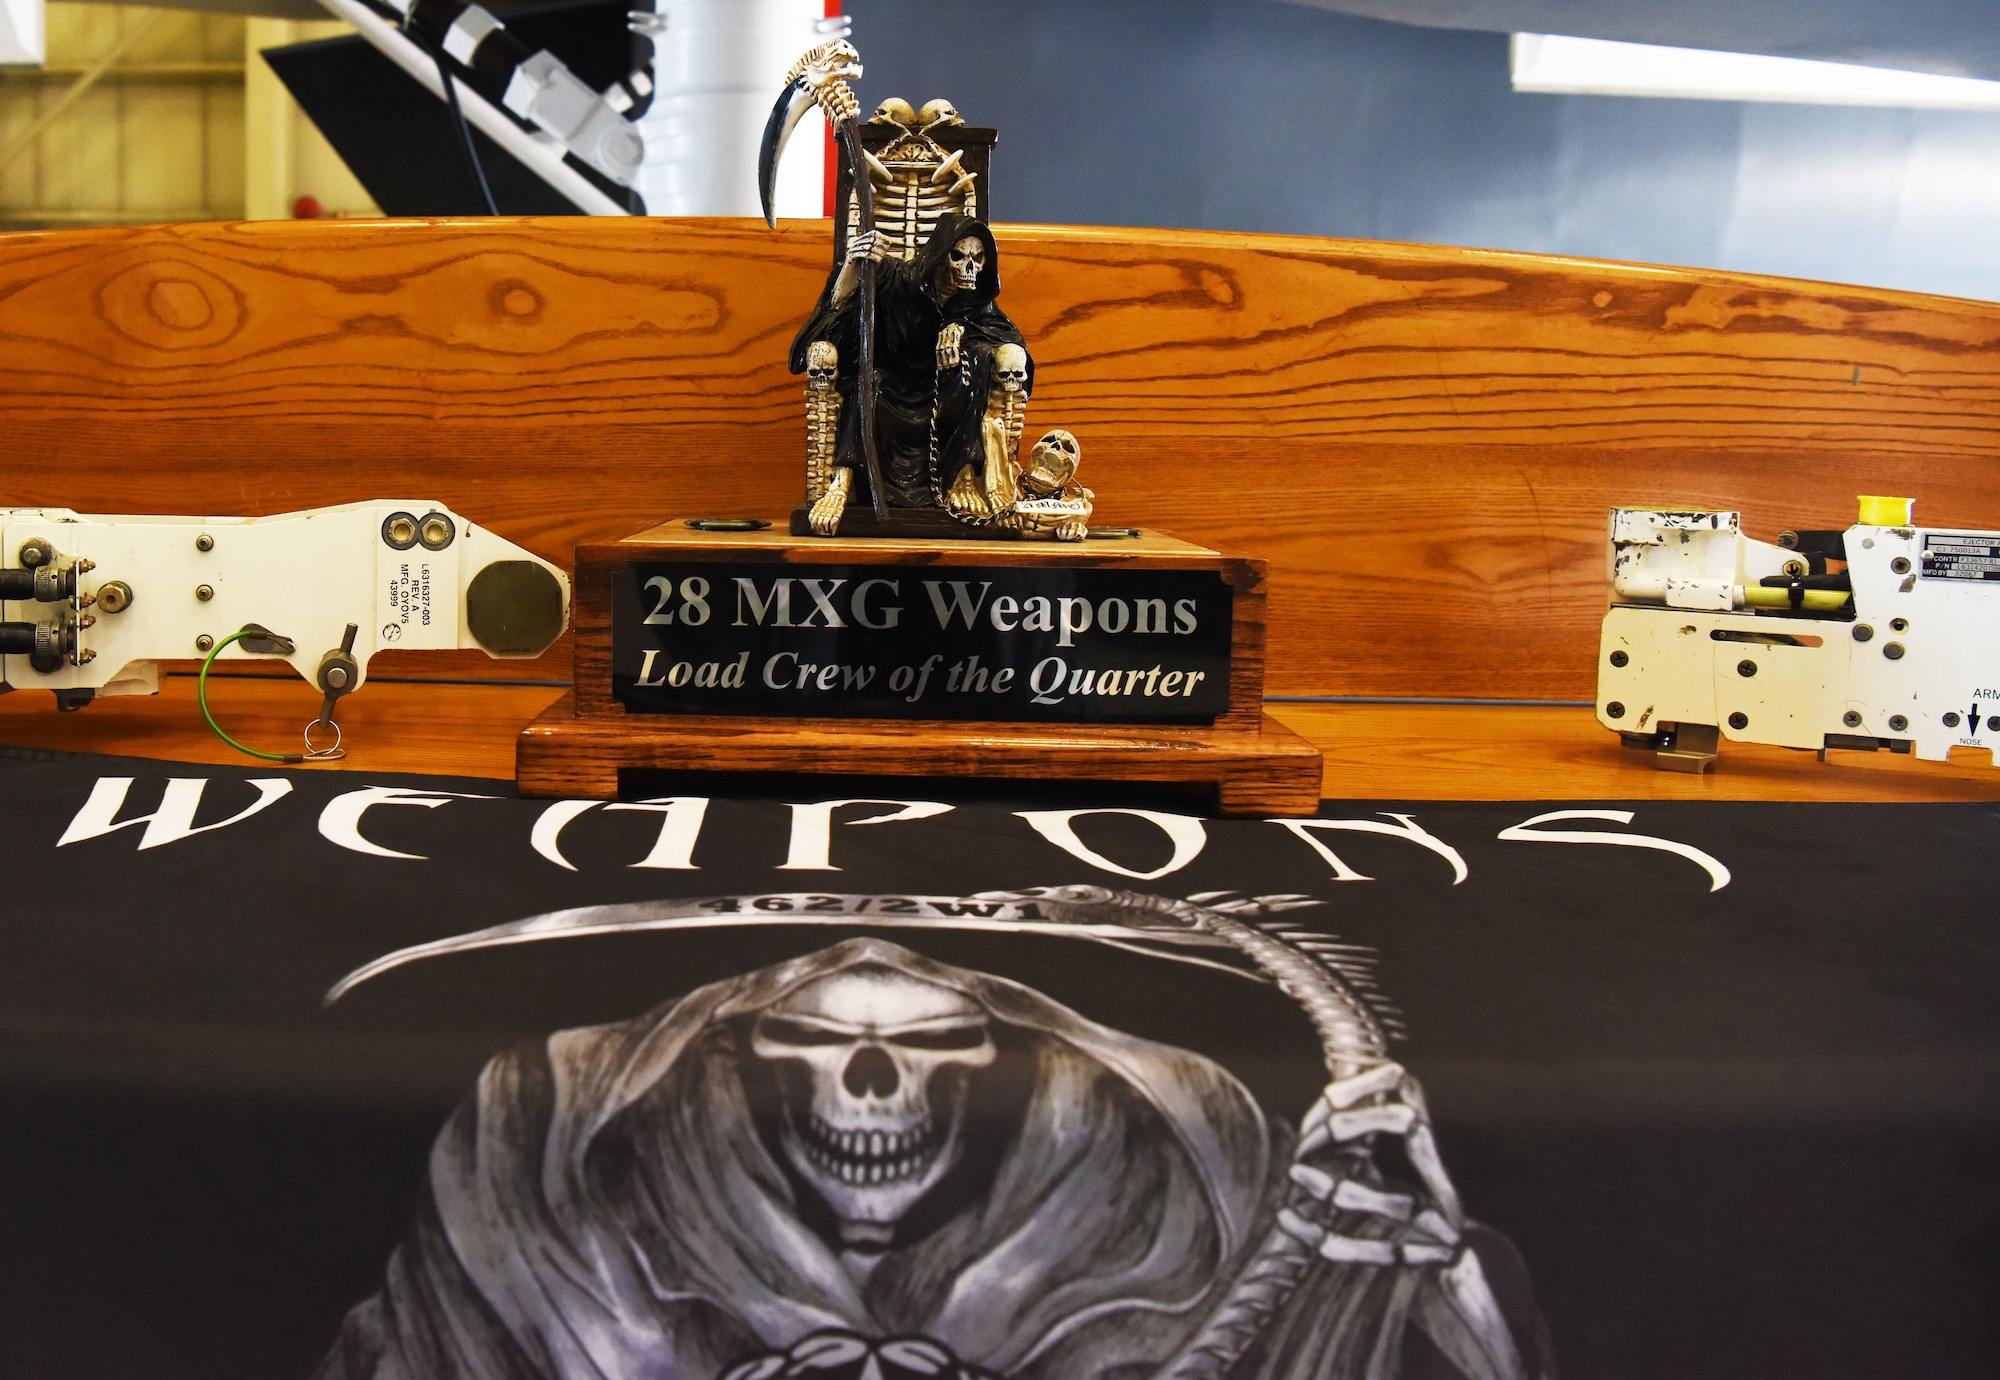 The trophy for the 28th Maintenance Group Weapons load crew of the quarter is displayed at the Load Crew Training Facility at Ellsworth Air Force Base, S.D., July 13, 2018. Two teams of four from the 34th and 37th Aircraft Maintenance Units competed to see who could load three 500-pound bombs on a simulated B-1 Bomber the fastest with the least amount of errors. (U.S Air Force photo by Airman 1st Class Thomas Karol)